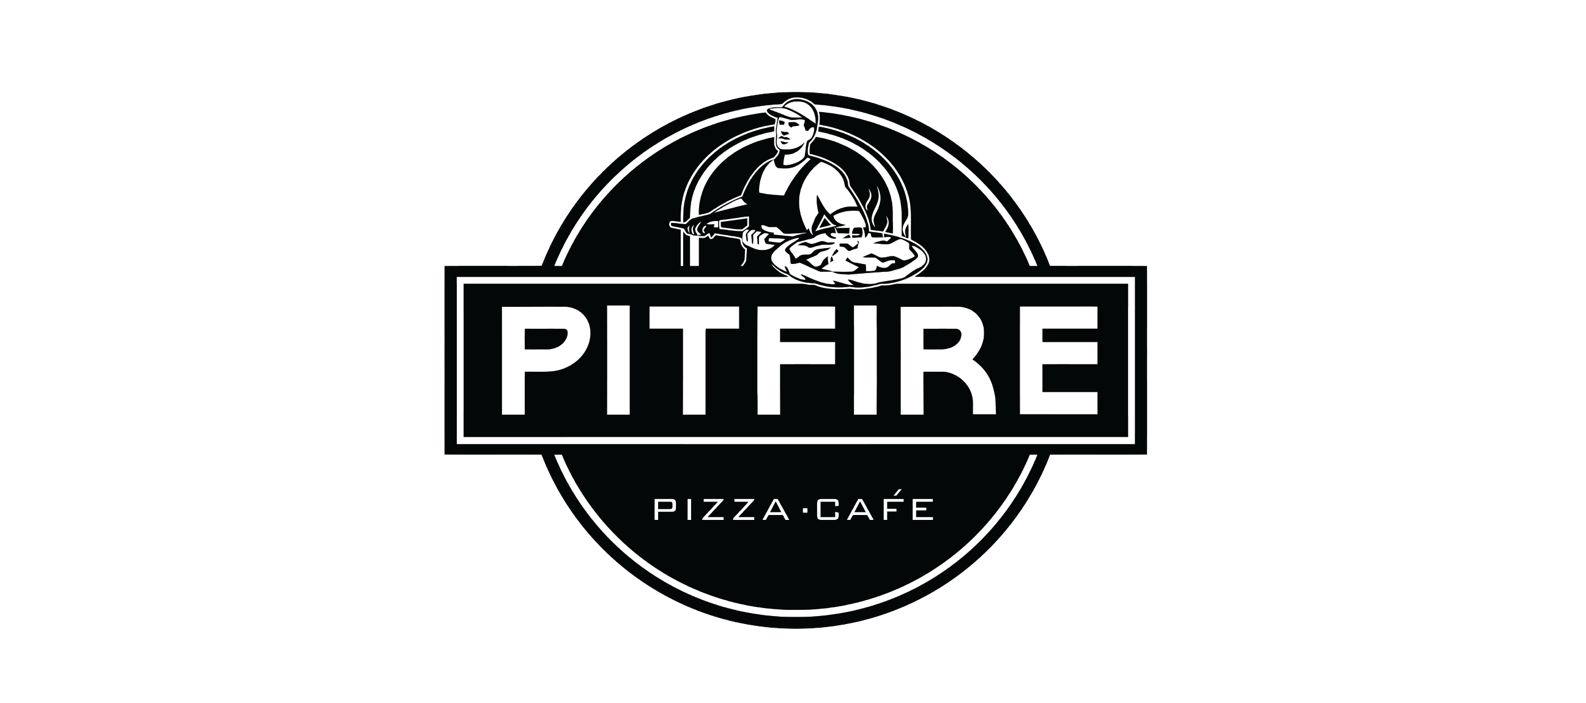 Spitfire Pizza Logo - The Gun Slinging Business Story Behind Pitfire Pizza In Dubai ...